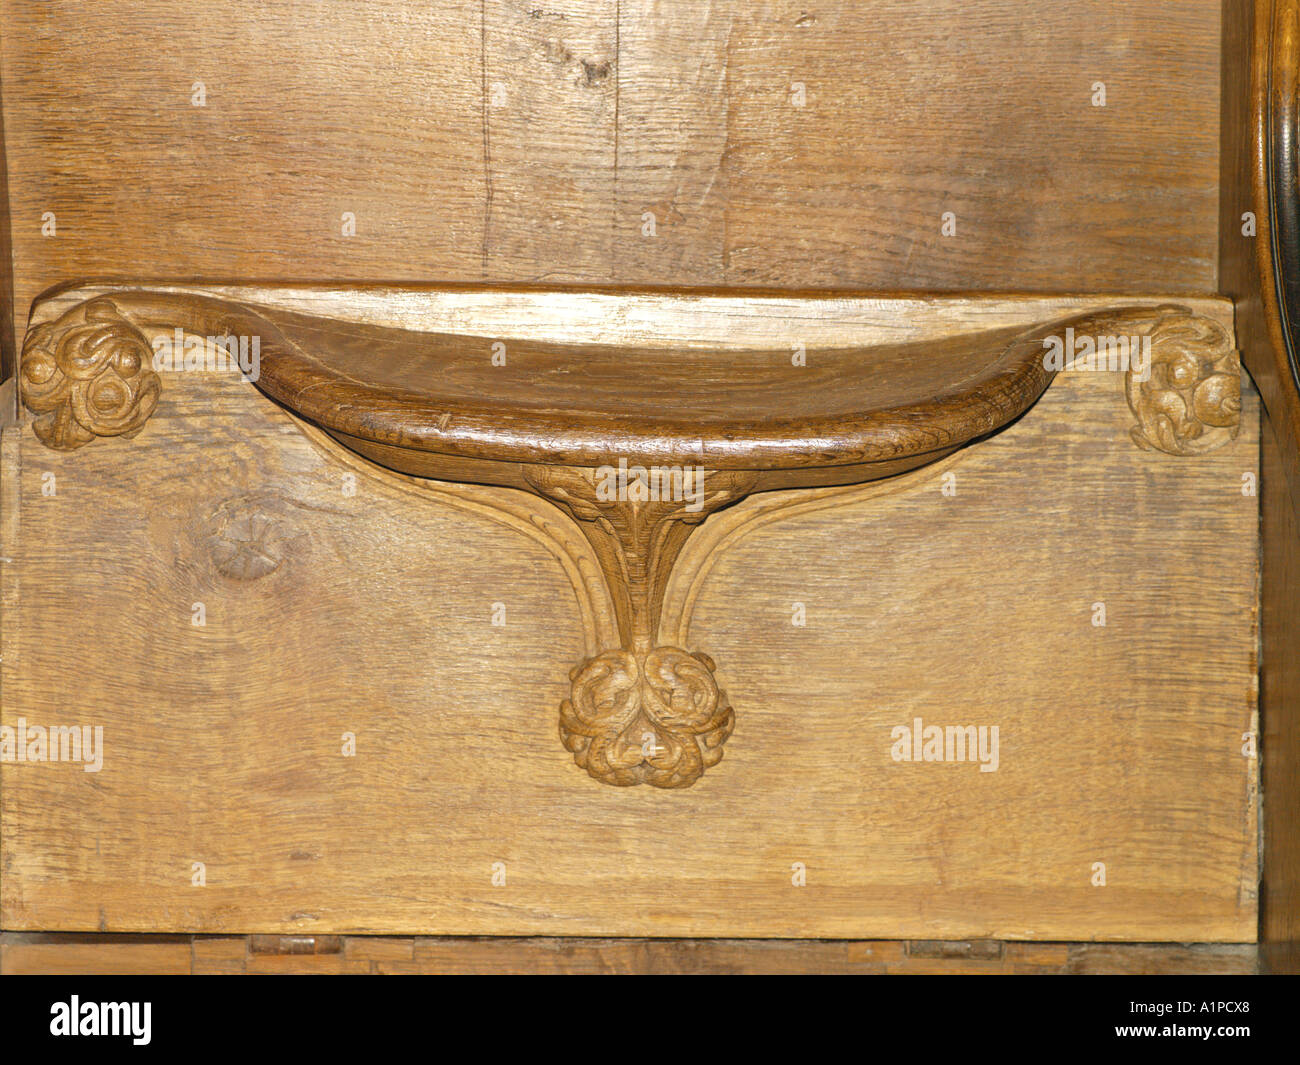 Salisbury Wiltshire England Salisbury Cathedral Thirteenth Century Misericord under Stall in the Quire Stock Photo